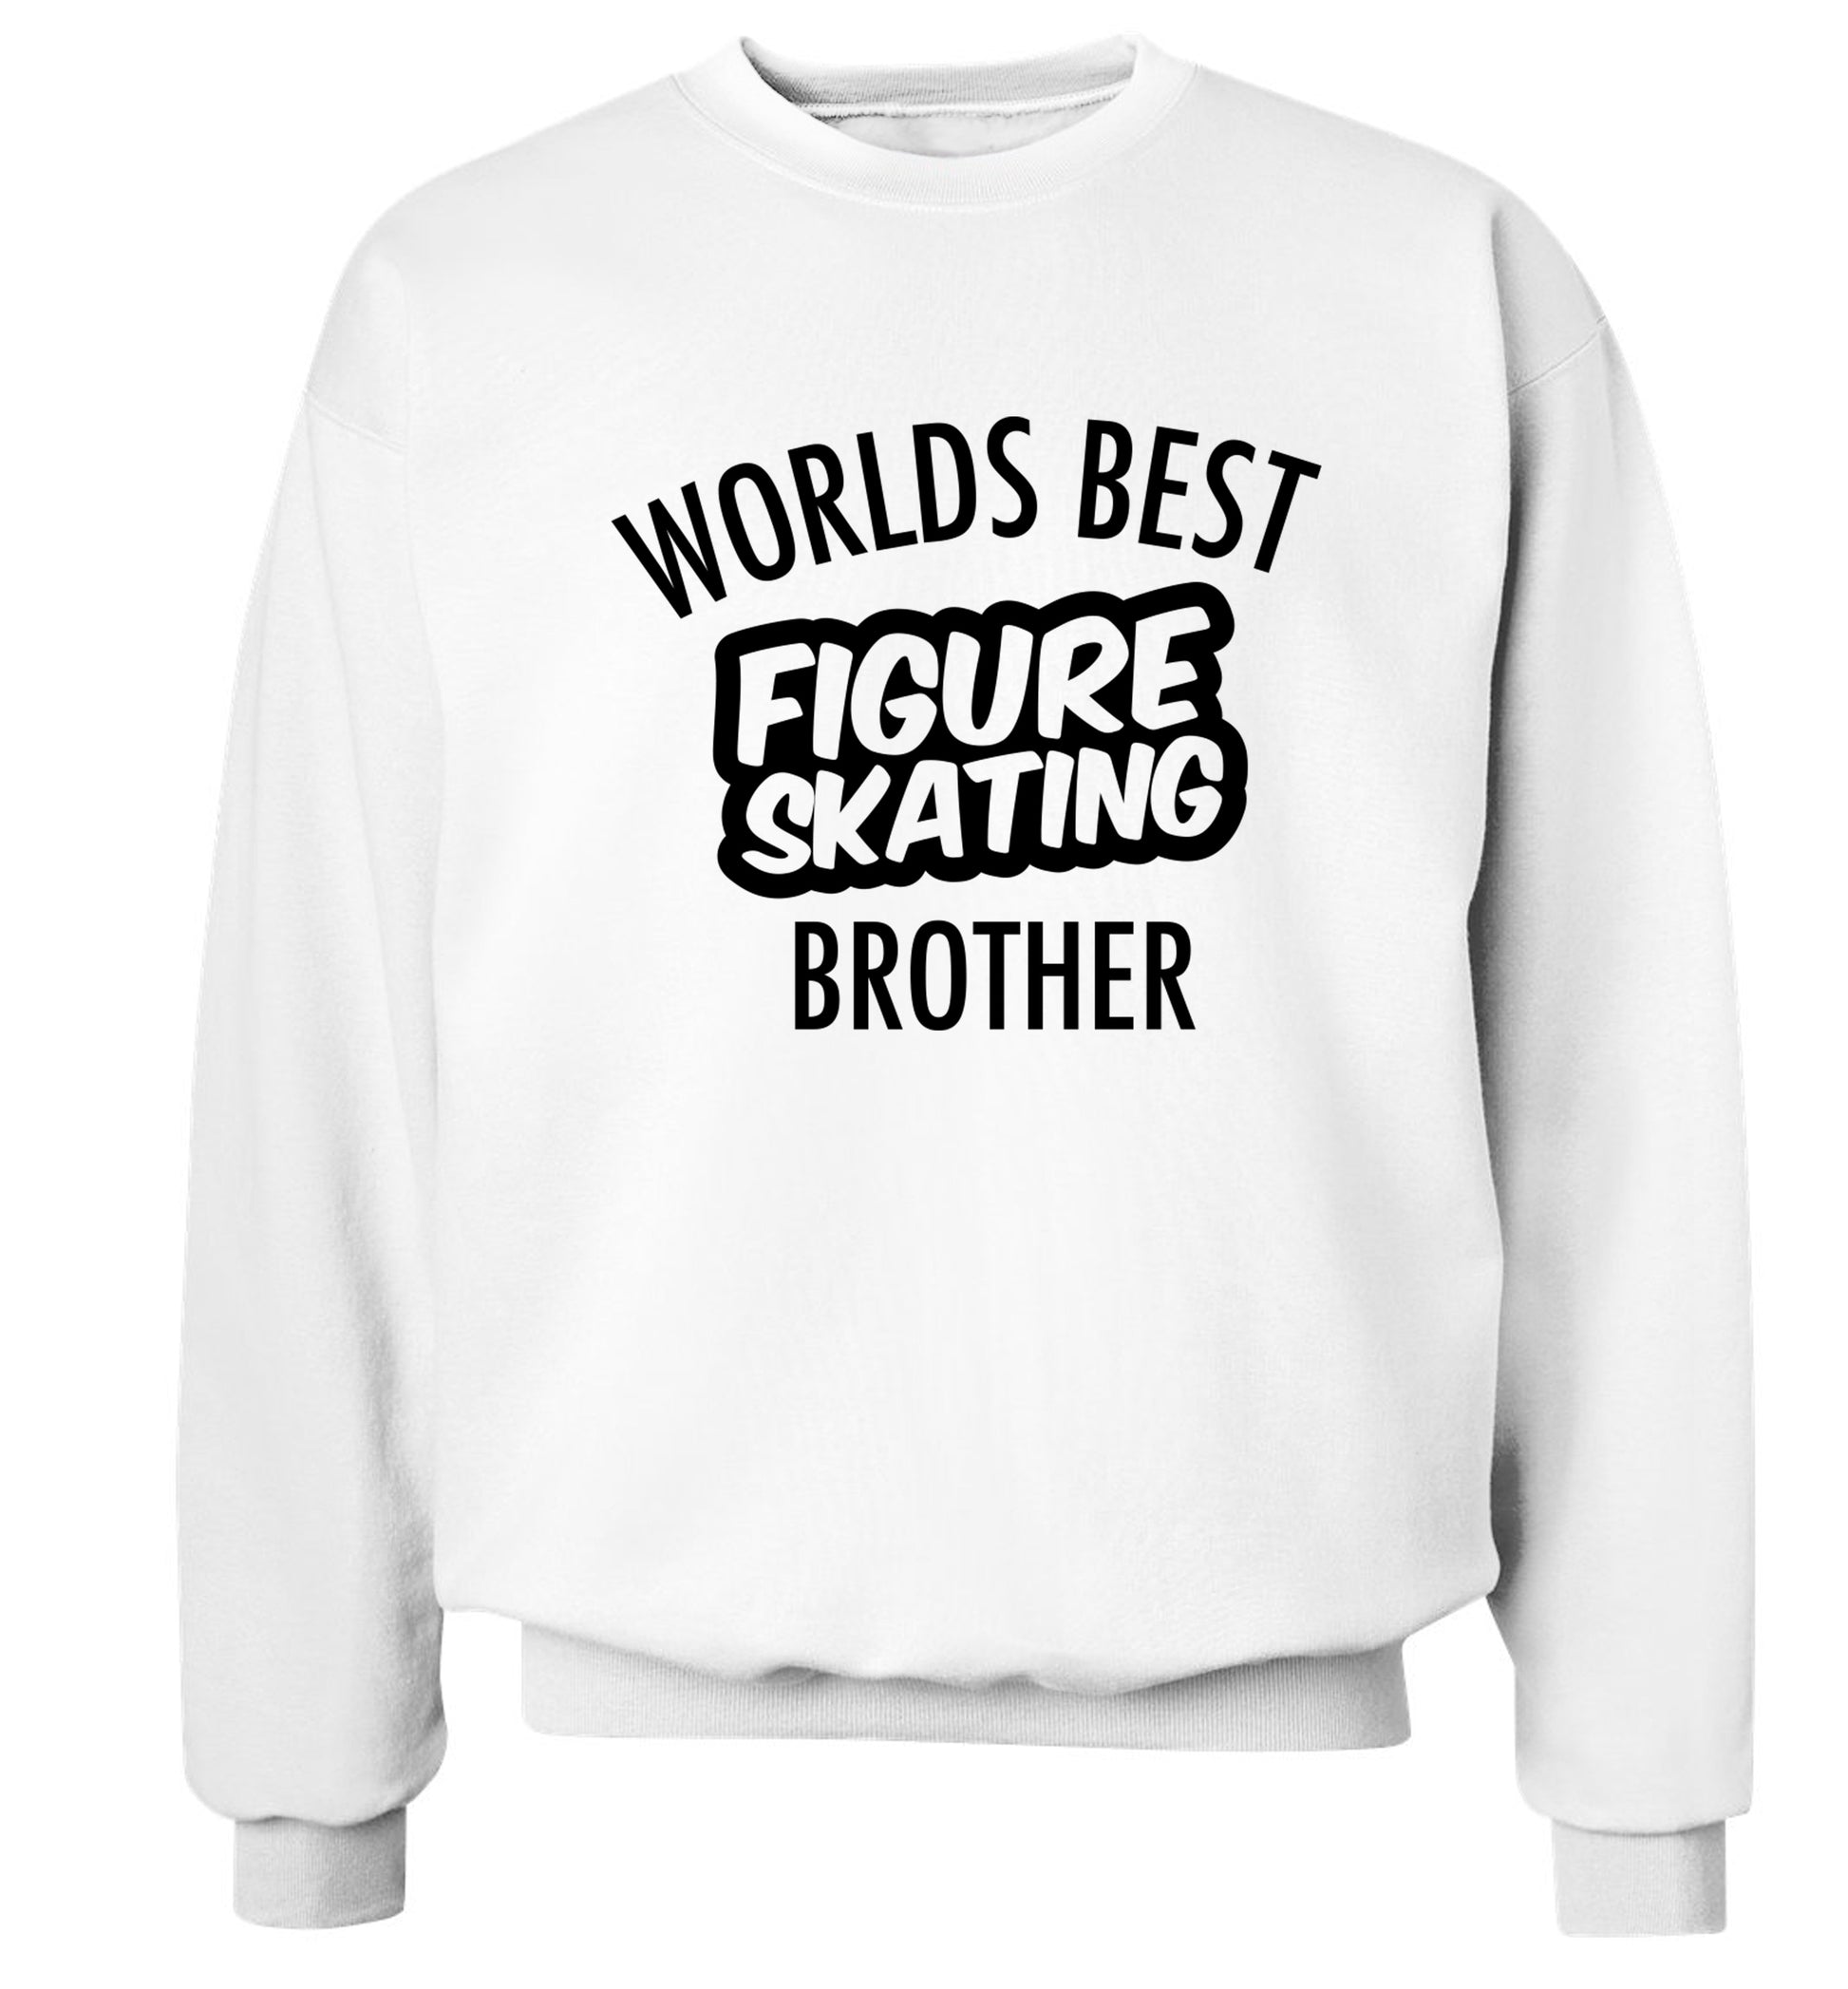 Worlds best figure skating brother Adult's unisexwhite Sweater 2XL